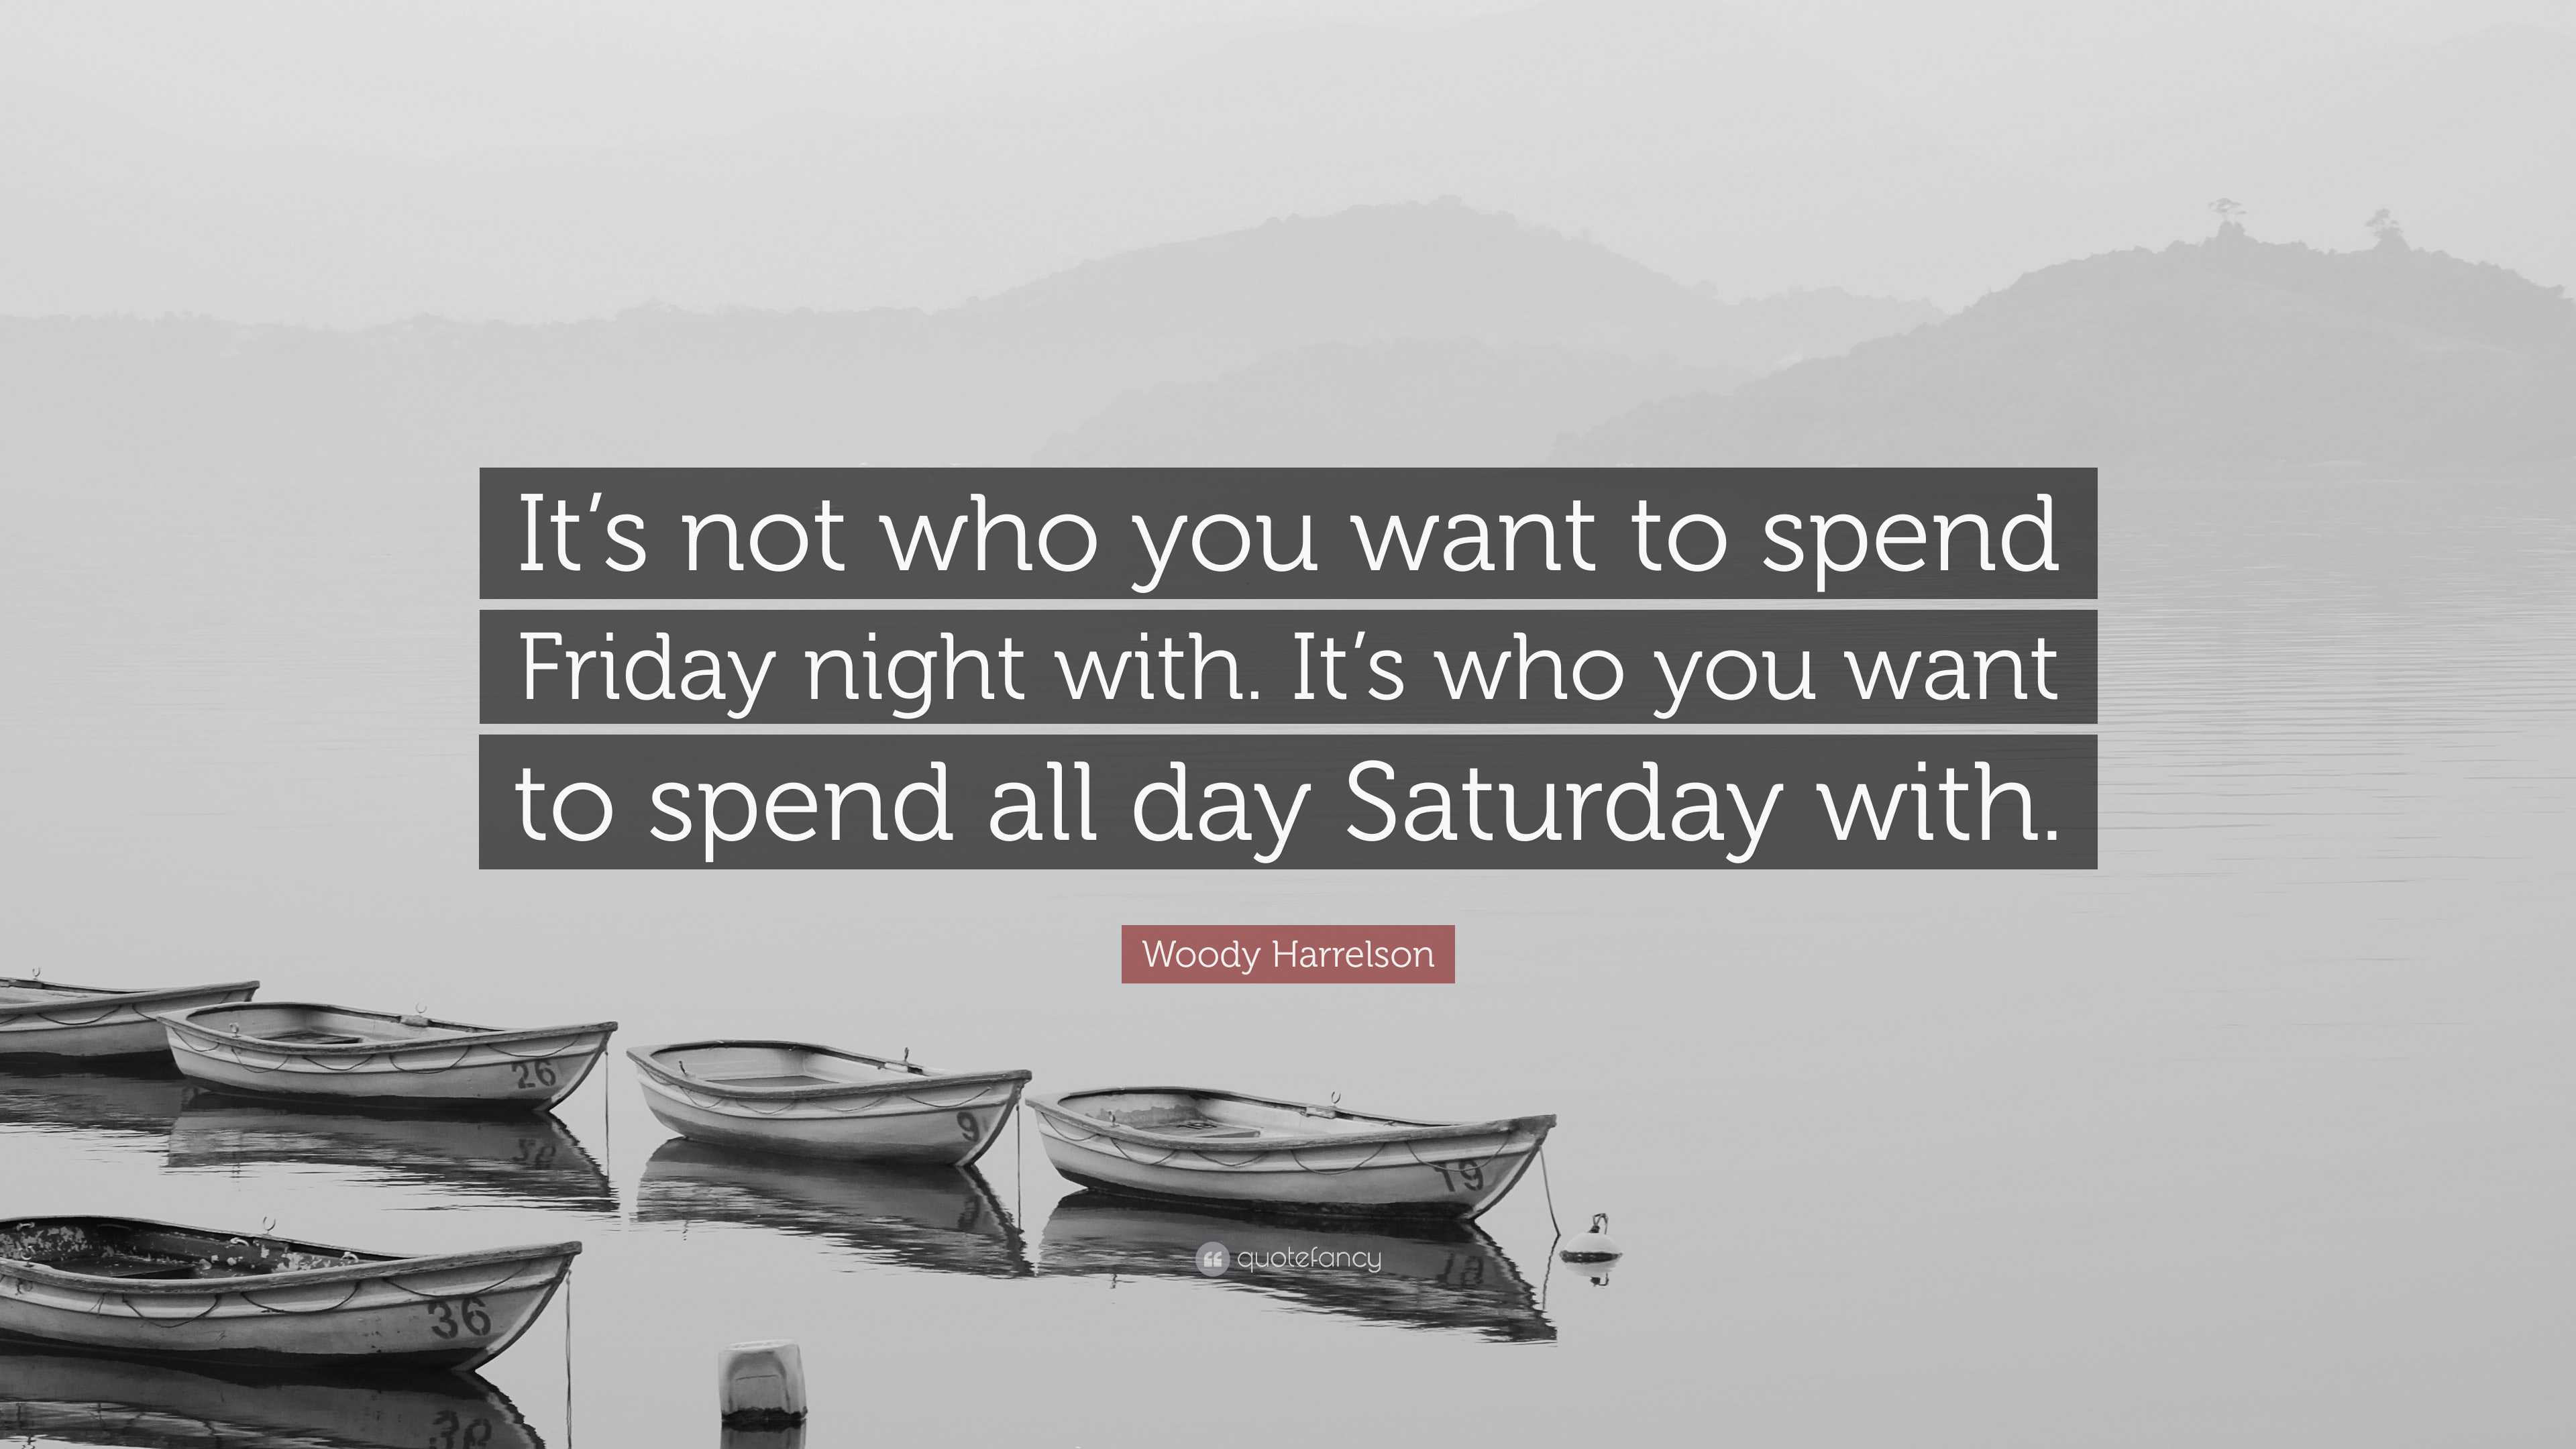 Woody Harrelson Quote: “It's not who you want to spend Friday night with.  It's who you